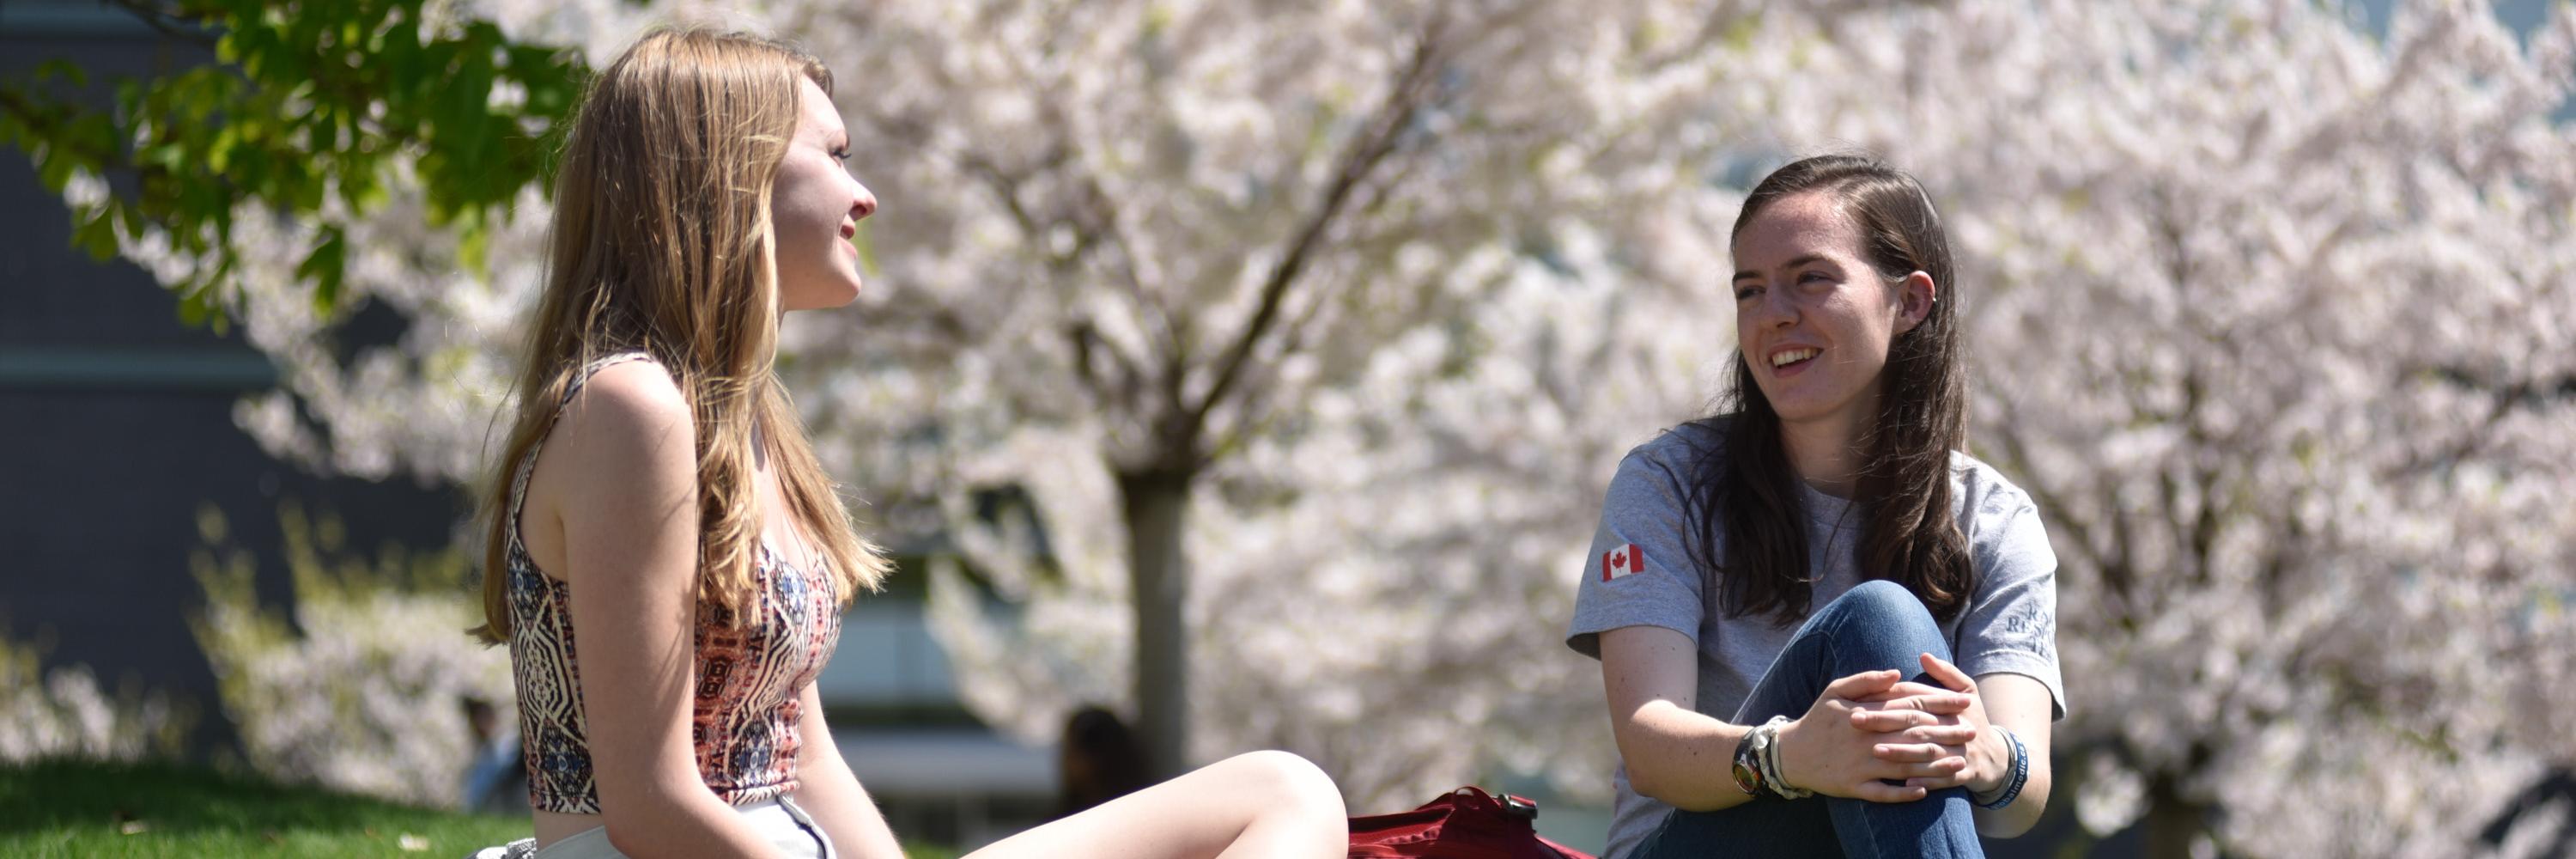 Two students in front of the cherry blossom trees in spring